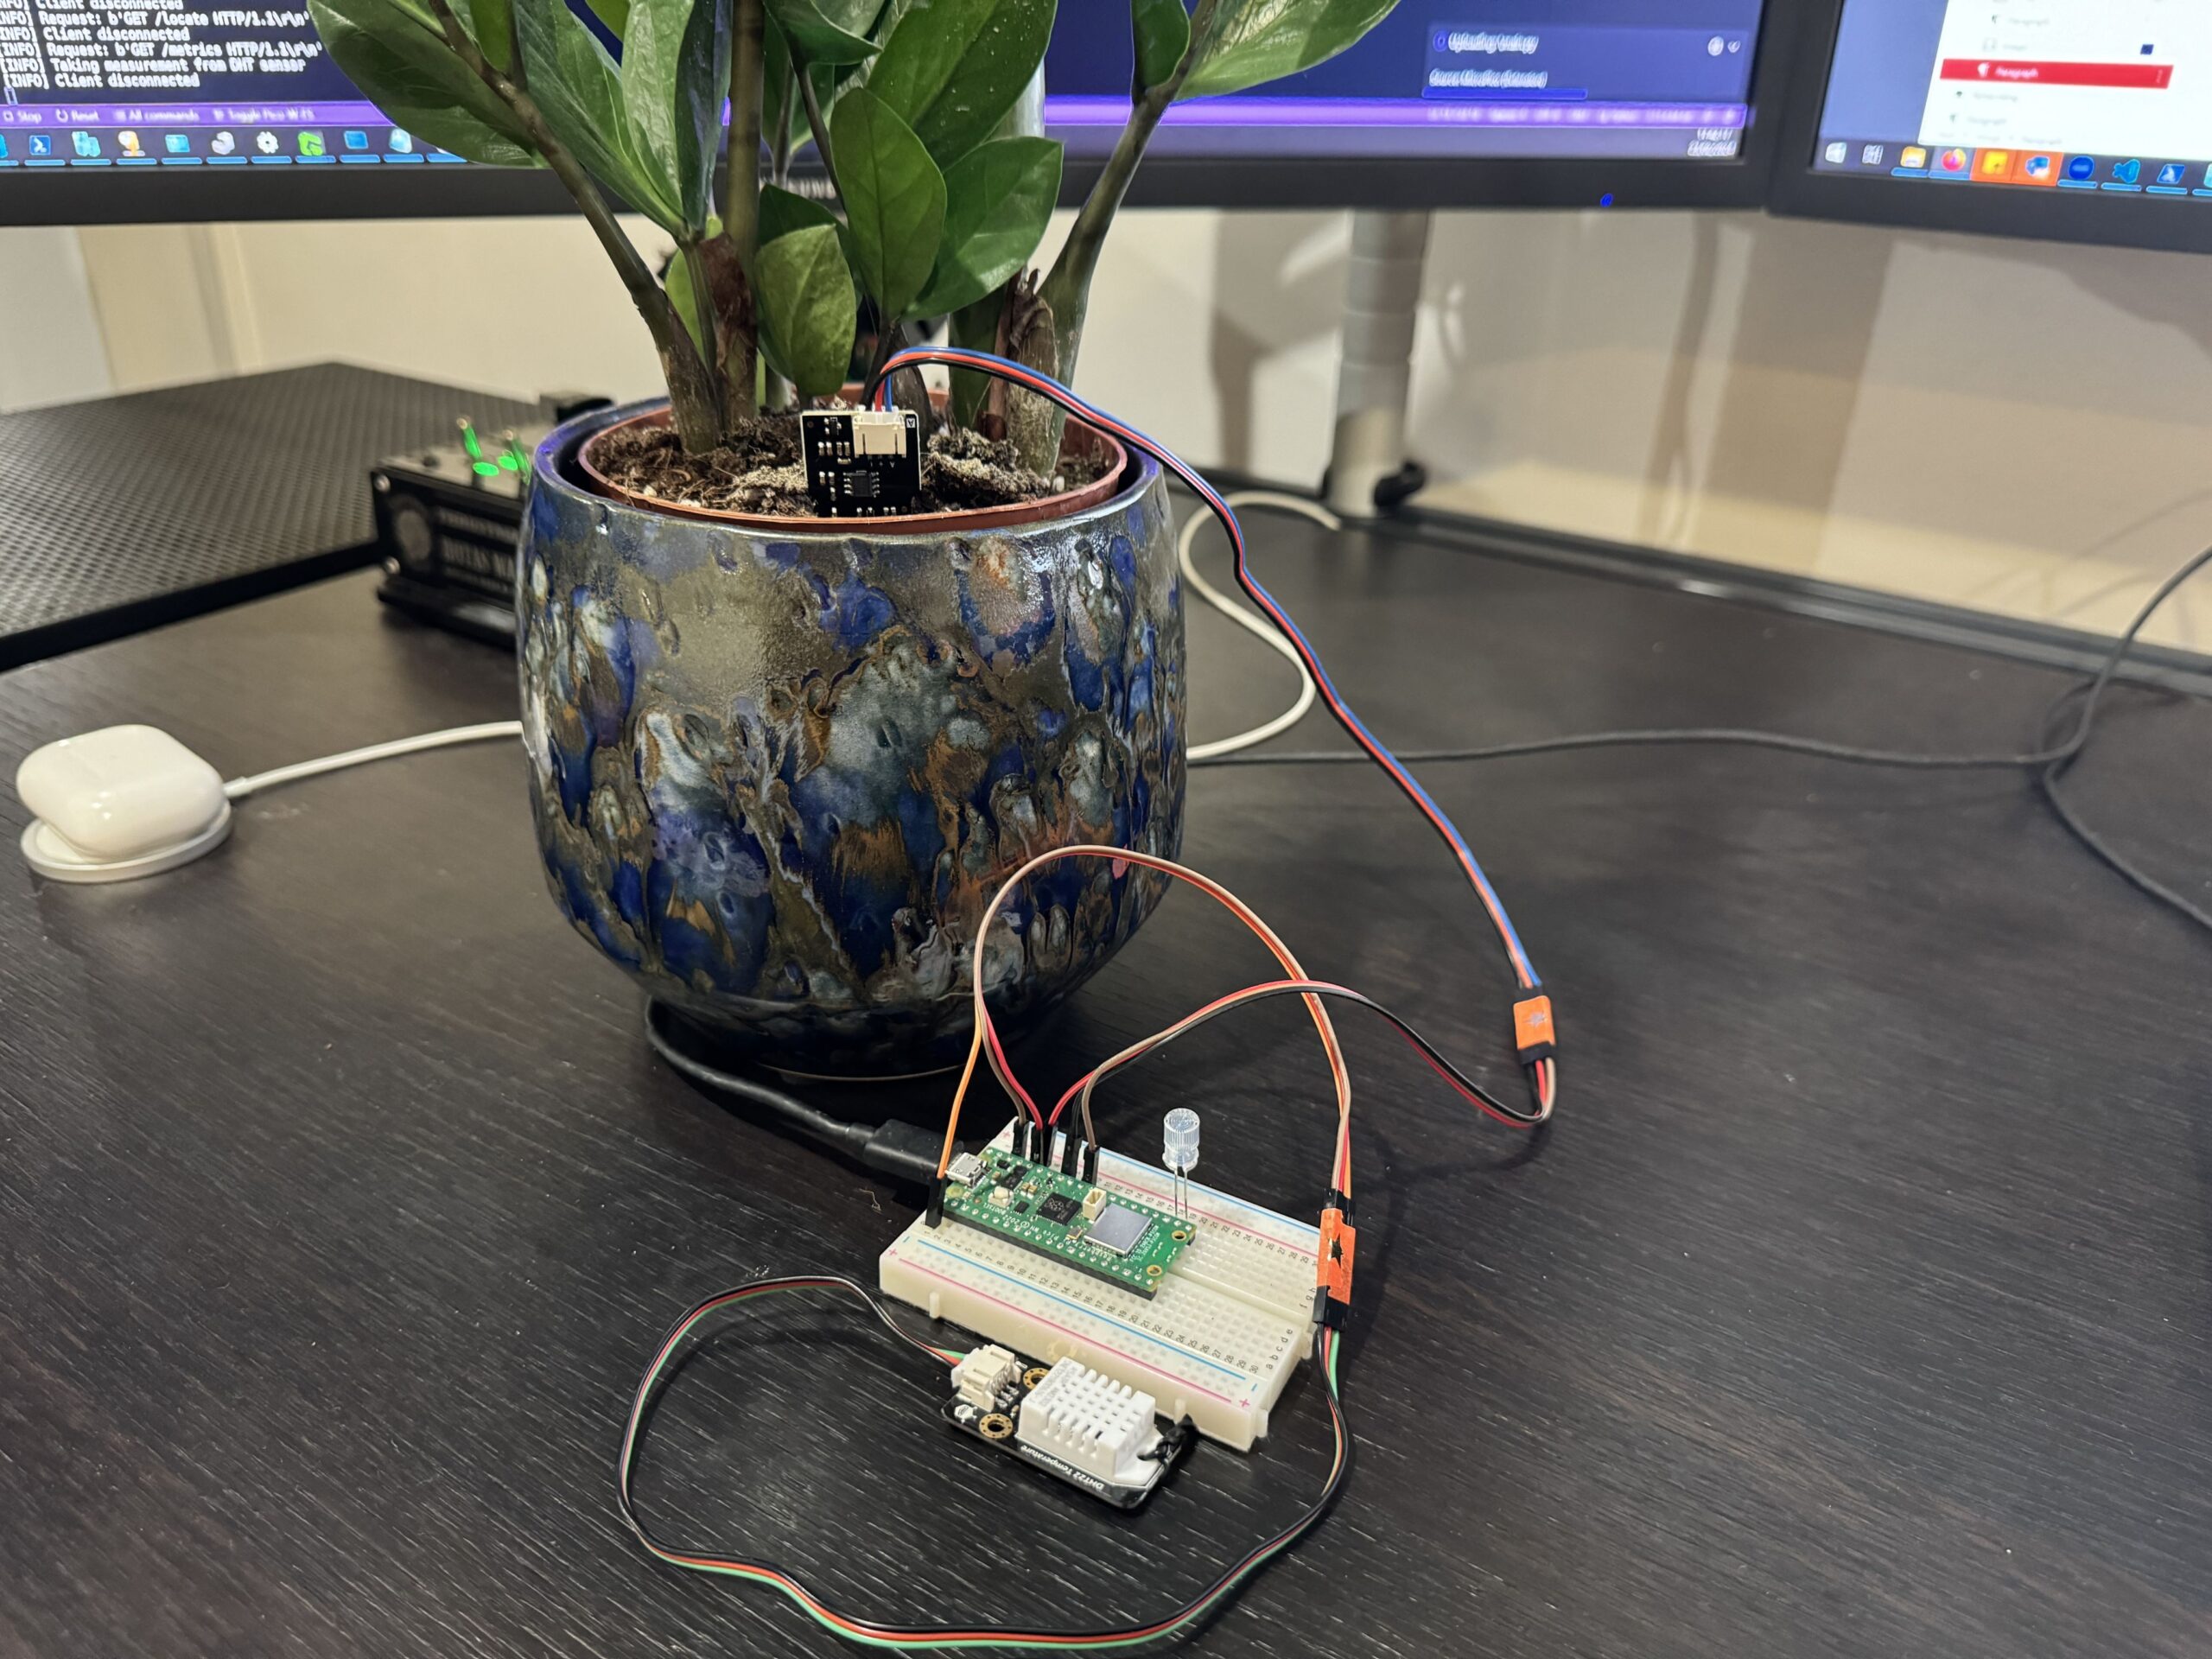 Photo of Pi Pico on breadboard with capacitive soil moisture sensor in beautiful pot and DuPoit jumper leads linking everything together as it's just a prototype